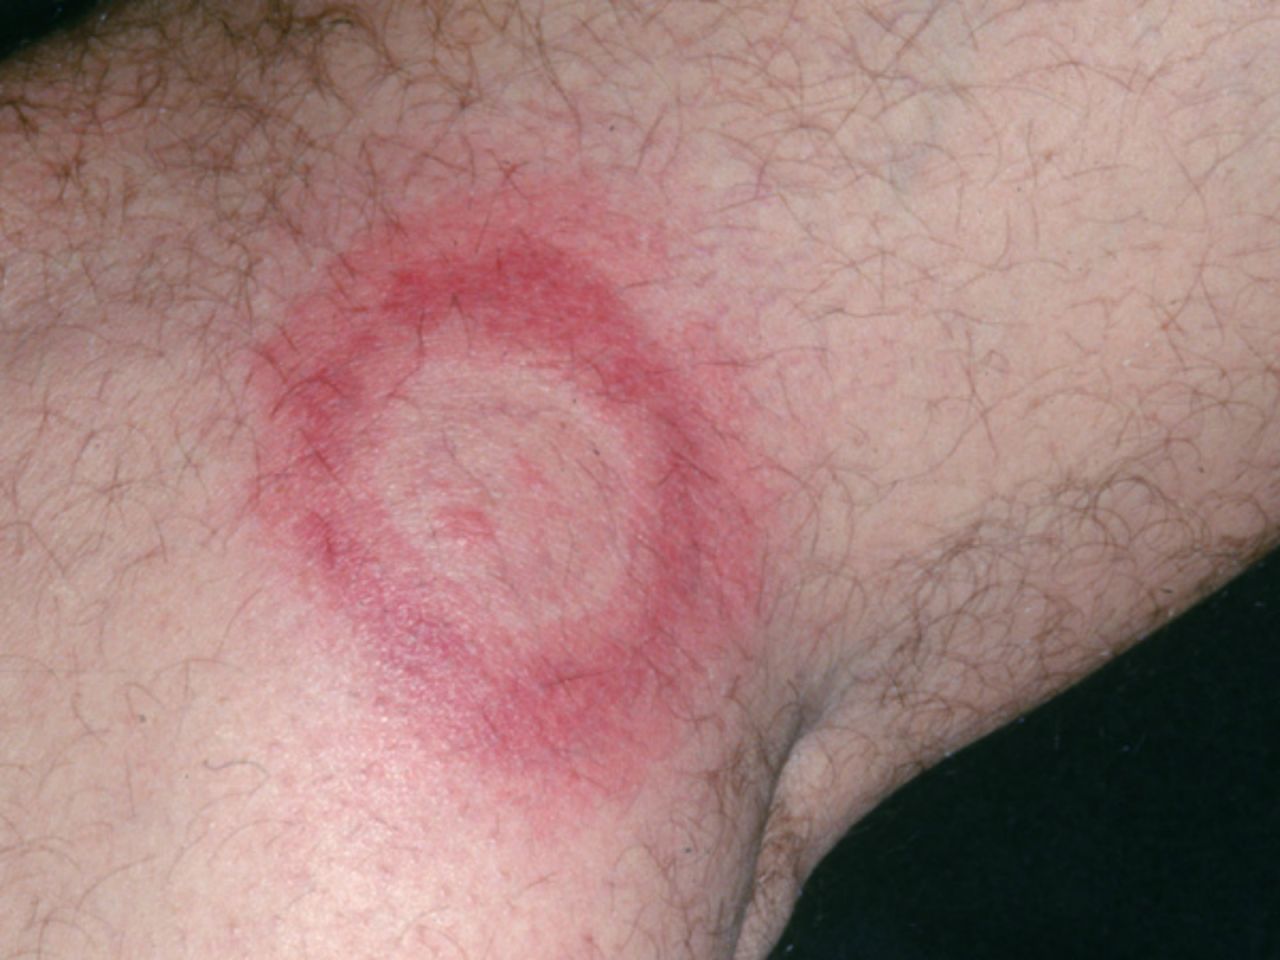 The deer tick transmits Lyme disease -- common to the northeast and upper Midwest of the USA. Many patients first develop an expanding "bull's-eye-like" rash at the site of the tick bites. The rash can be compared and verified using VisualDx to ensure an accurate diagnosis.